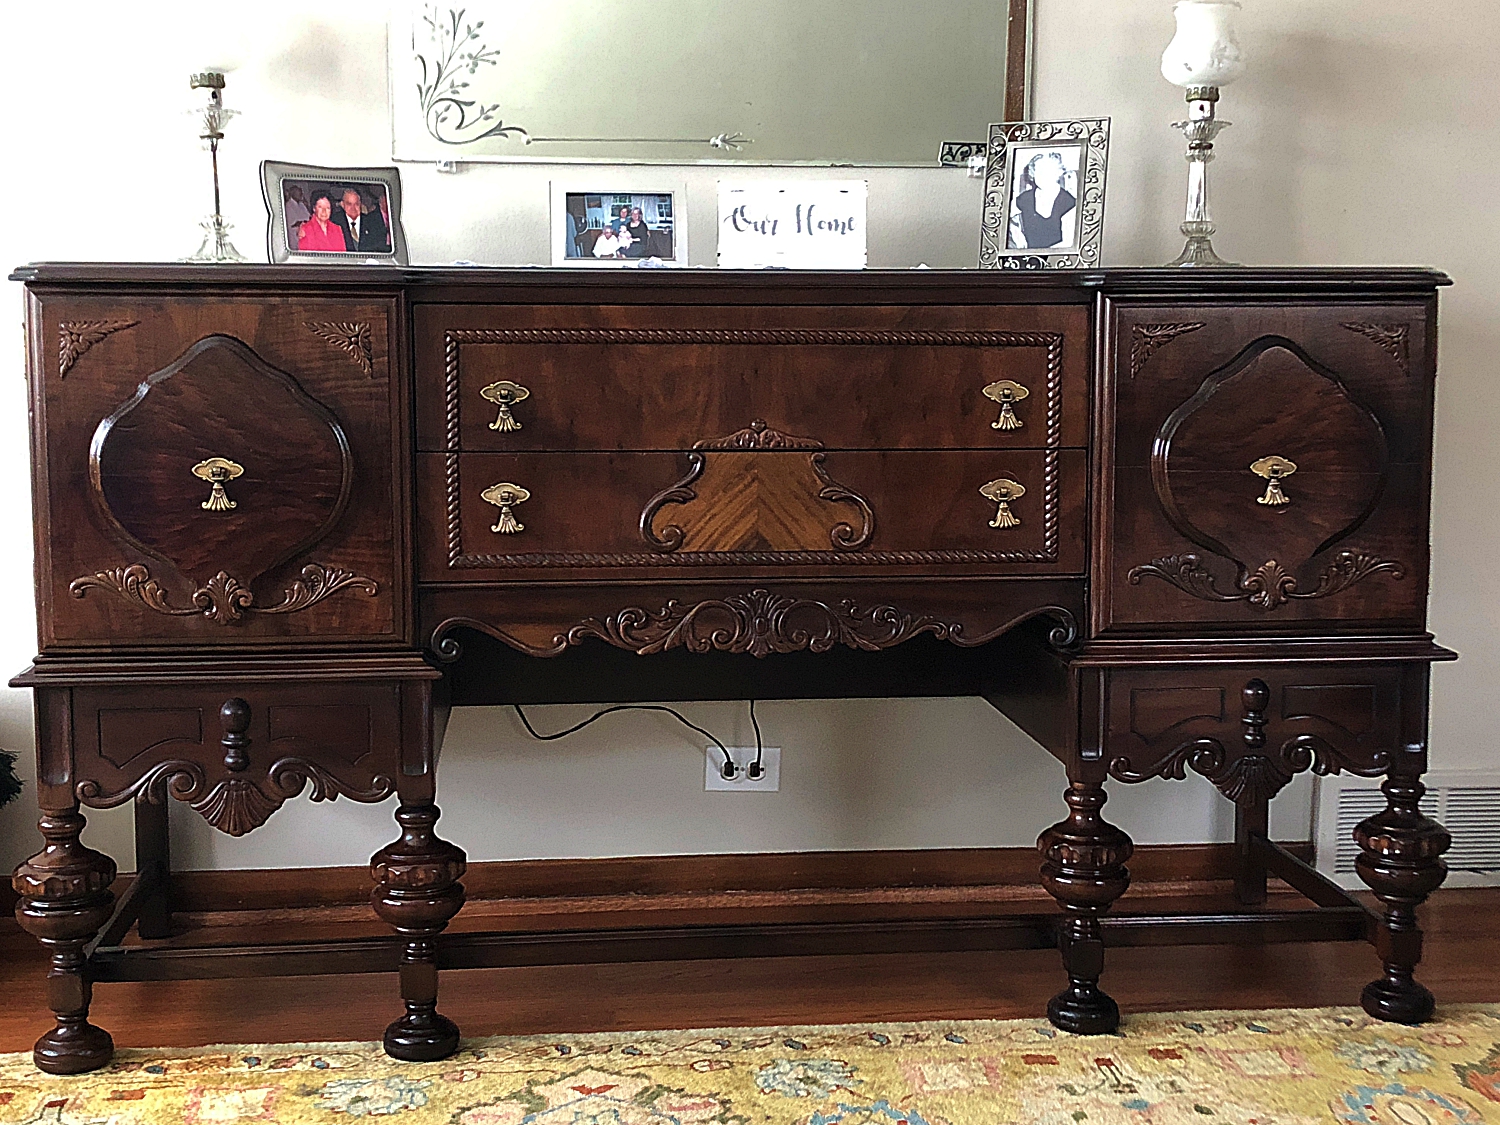 Antique Furniture Restoration: Tips And Techniques For DIYers